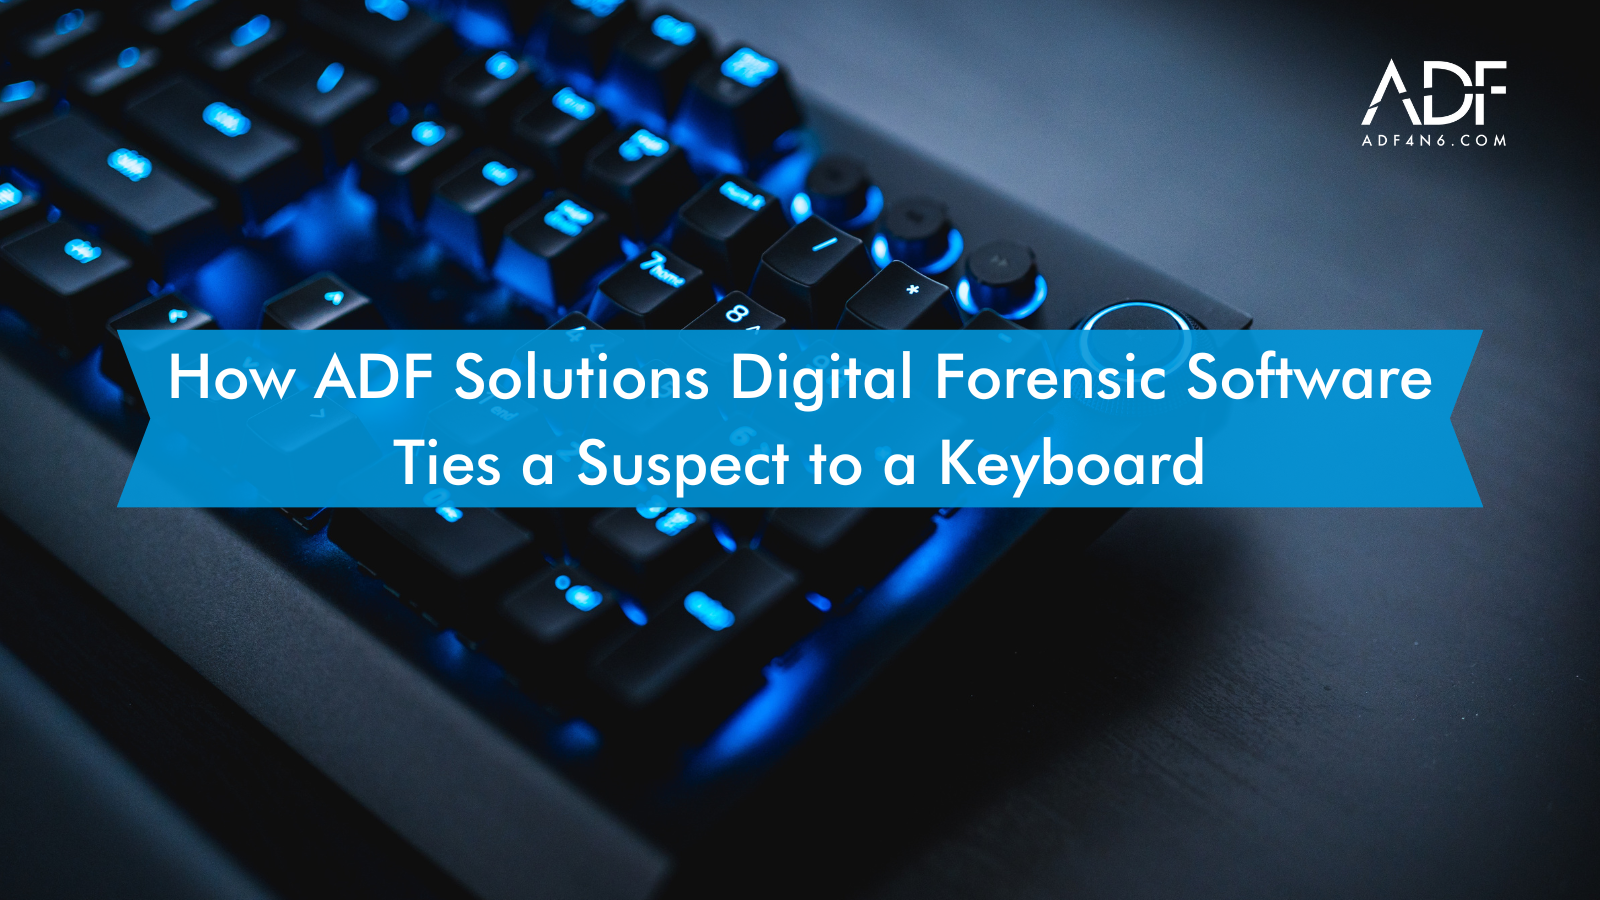 How ADF Solutions Digital Forensic Software Ties a Suspect to a Keyboard